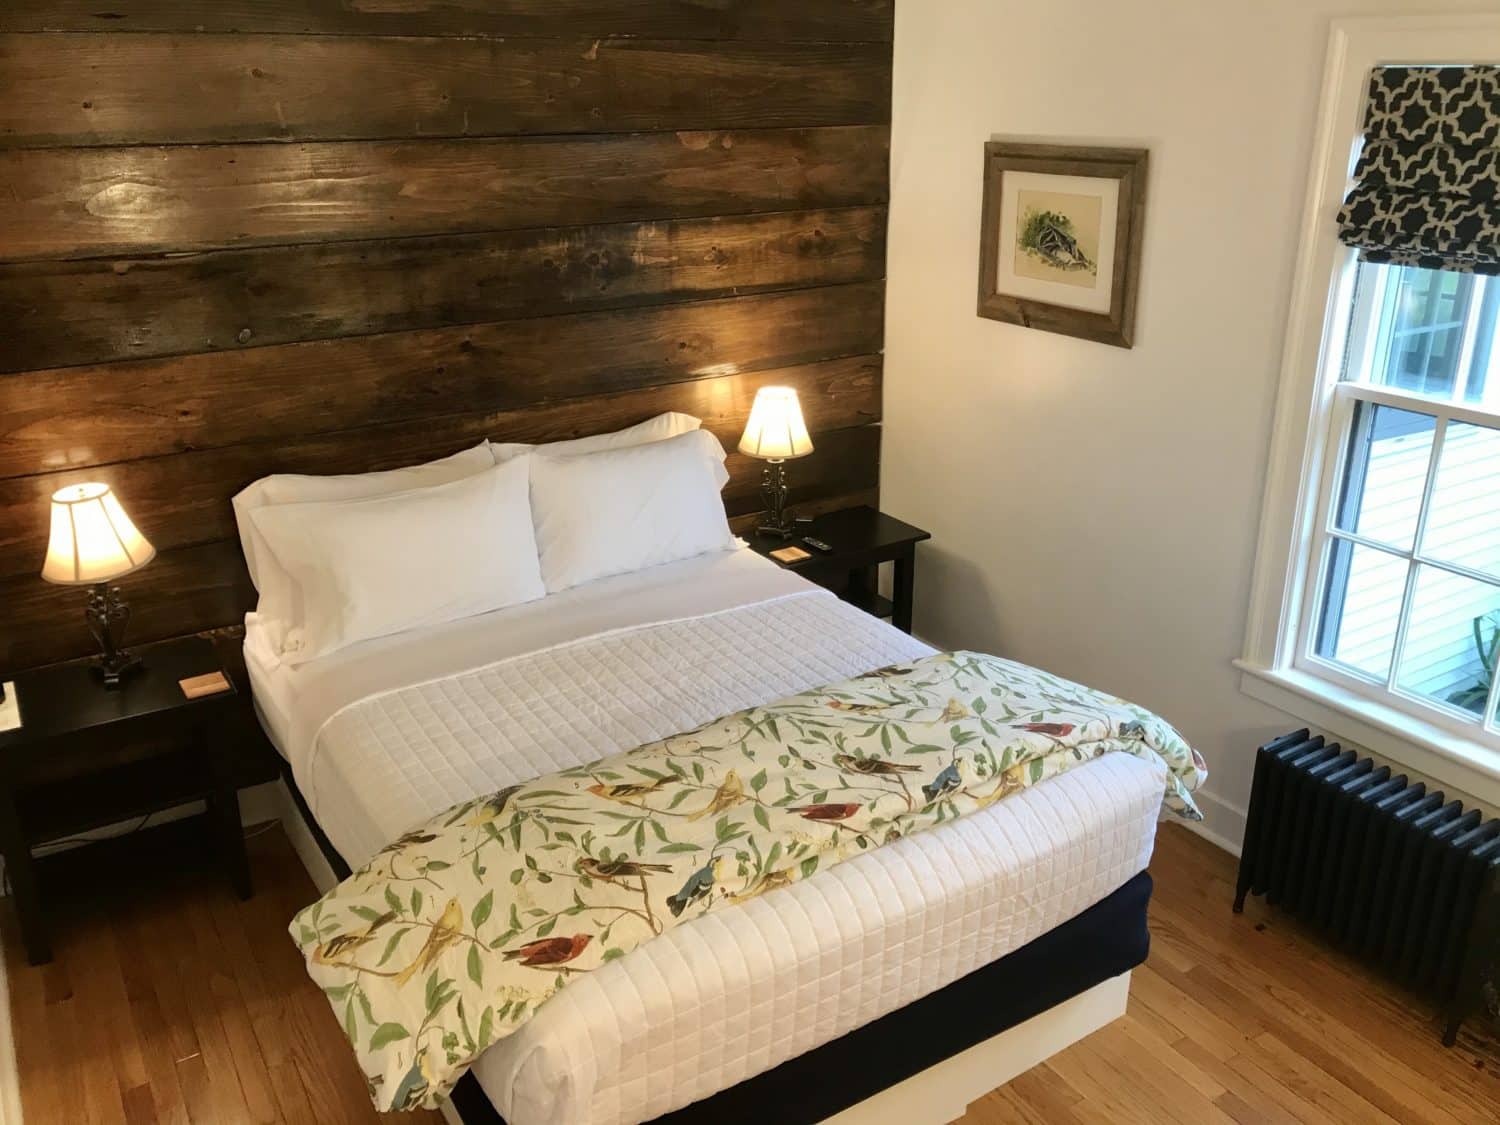 1824 House Inn + Barn - Queen Bed with Wood Panel Wall